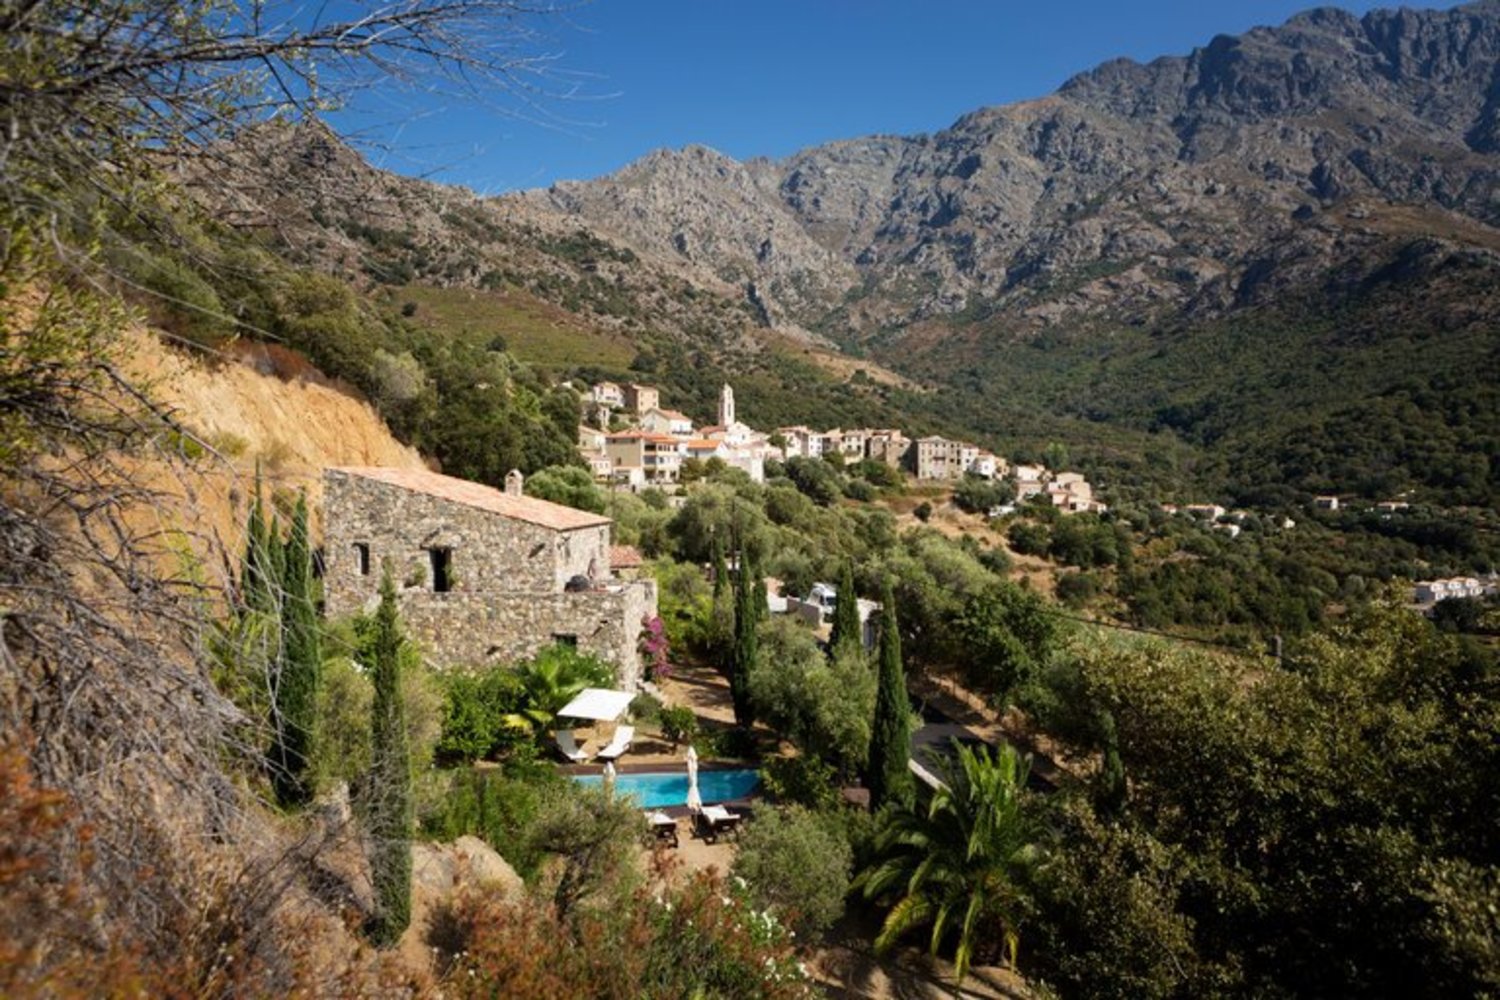 A two-story, three-bedroom stone villa that blends into the mountains in Zilia, Corsica, is on the market for $1.76 million. Credit Rebecca Marshall for The New York Times